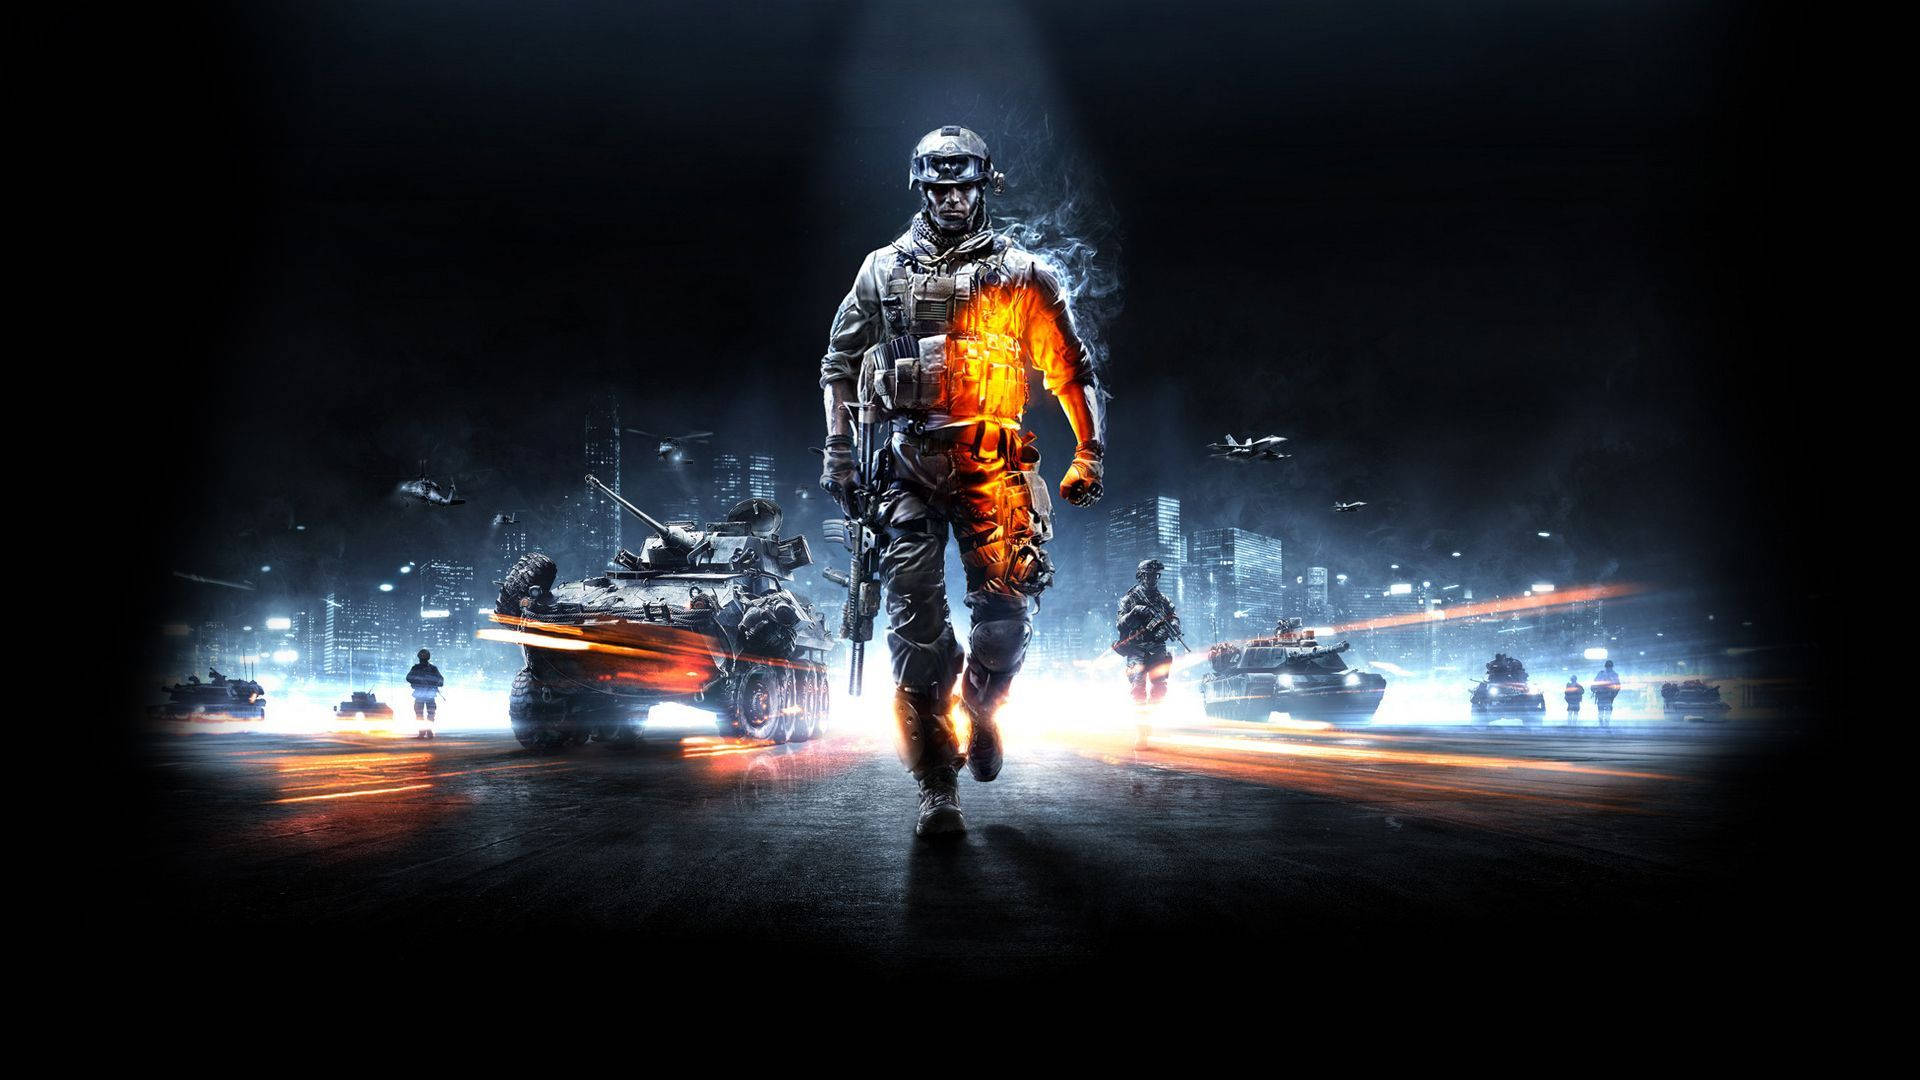 Cool Battlefield 3 Helicopters And Buildings Wallpaper